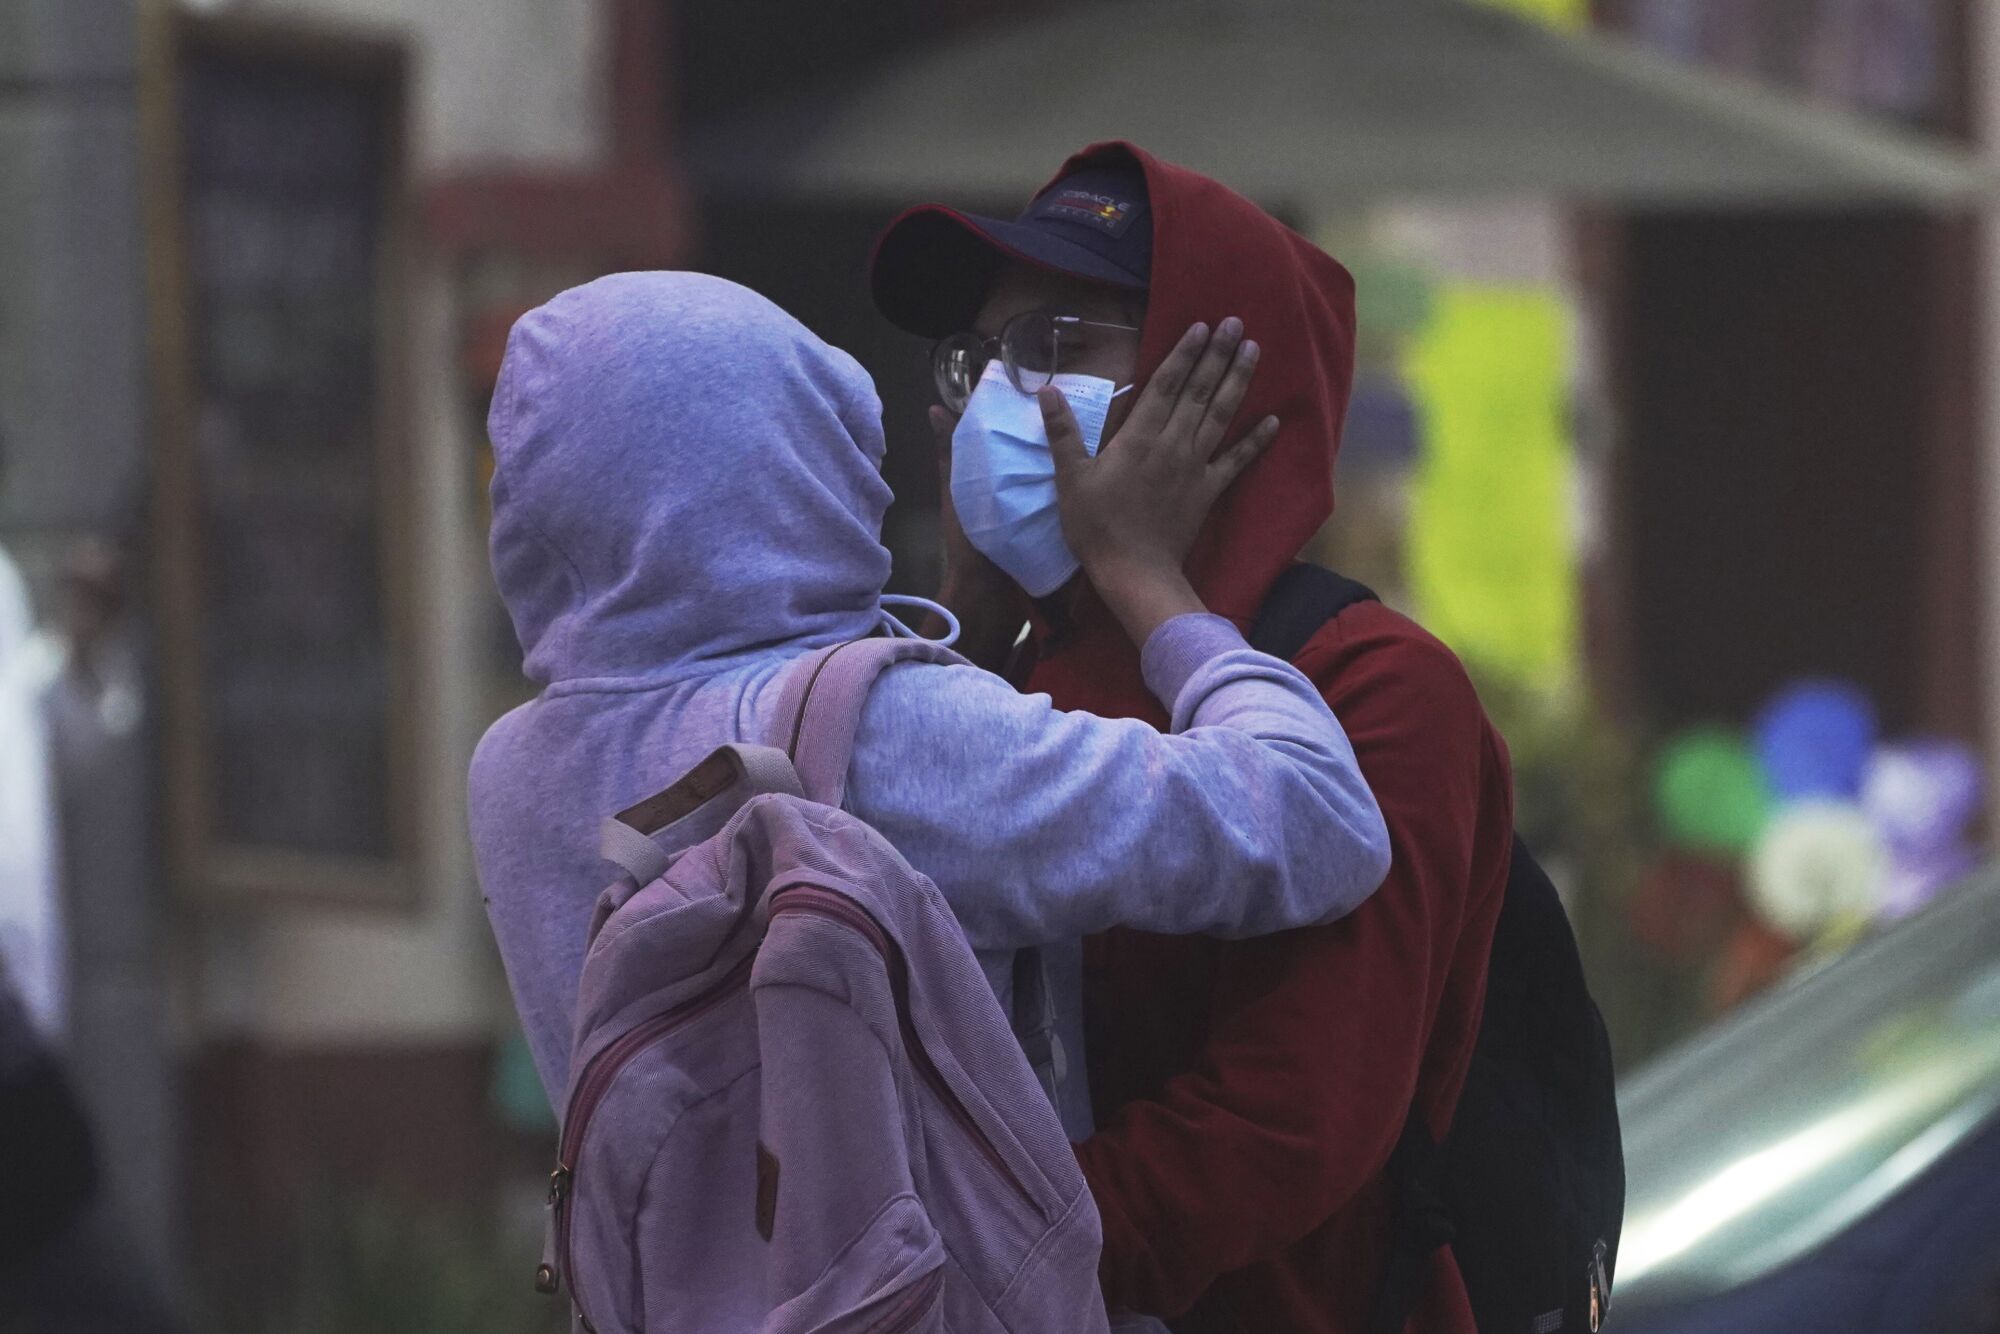 A person in a lavender hoodie and pink backpack places hands on the masked face of a person in a red hoodie, wearing glasses 